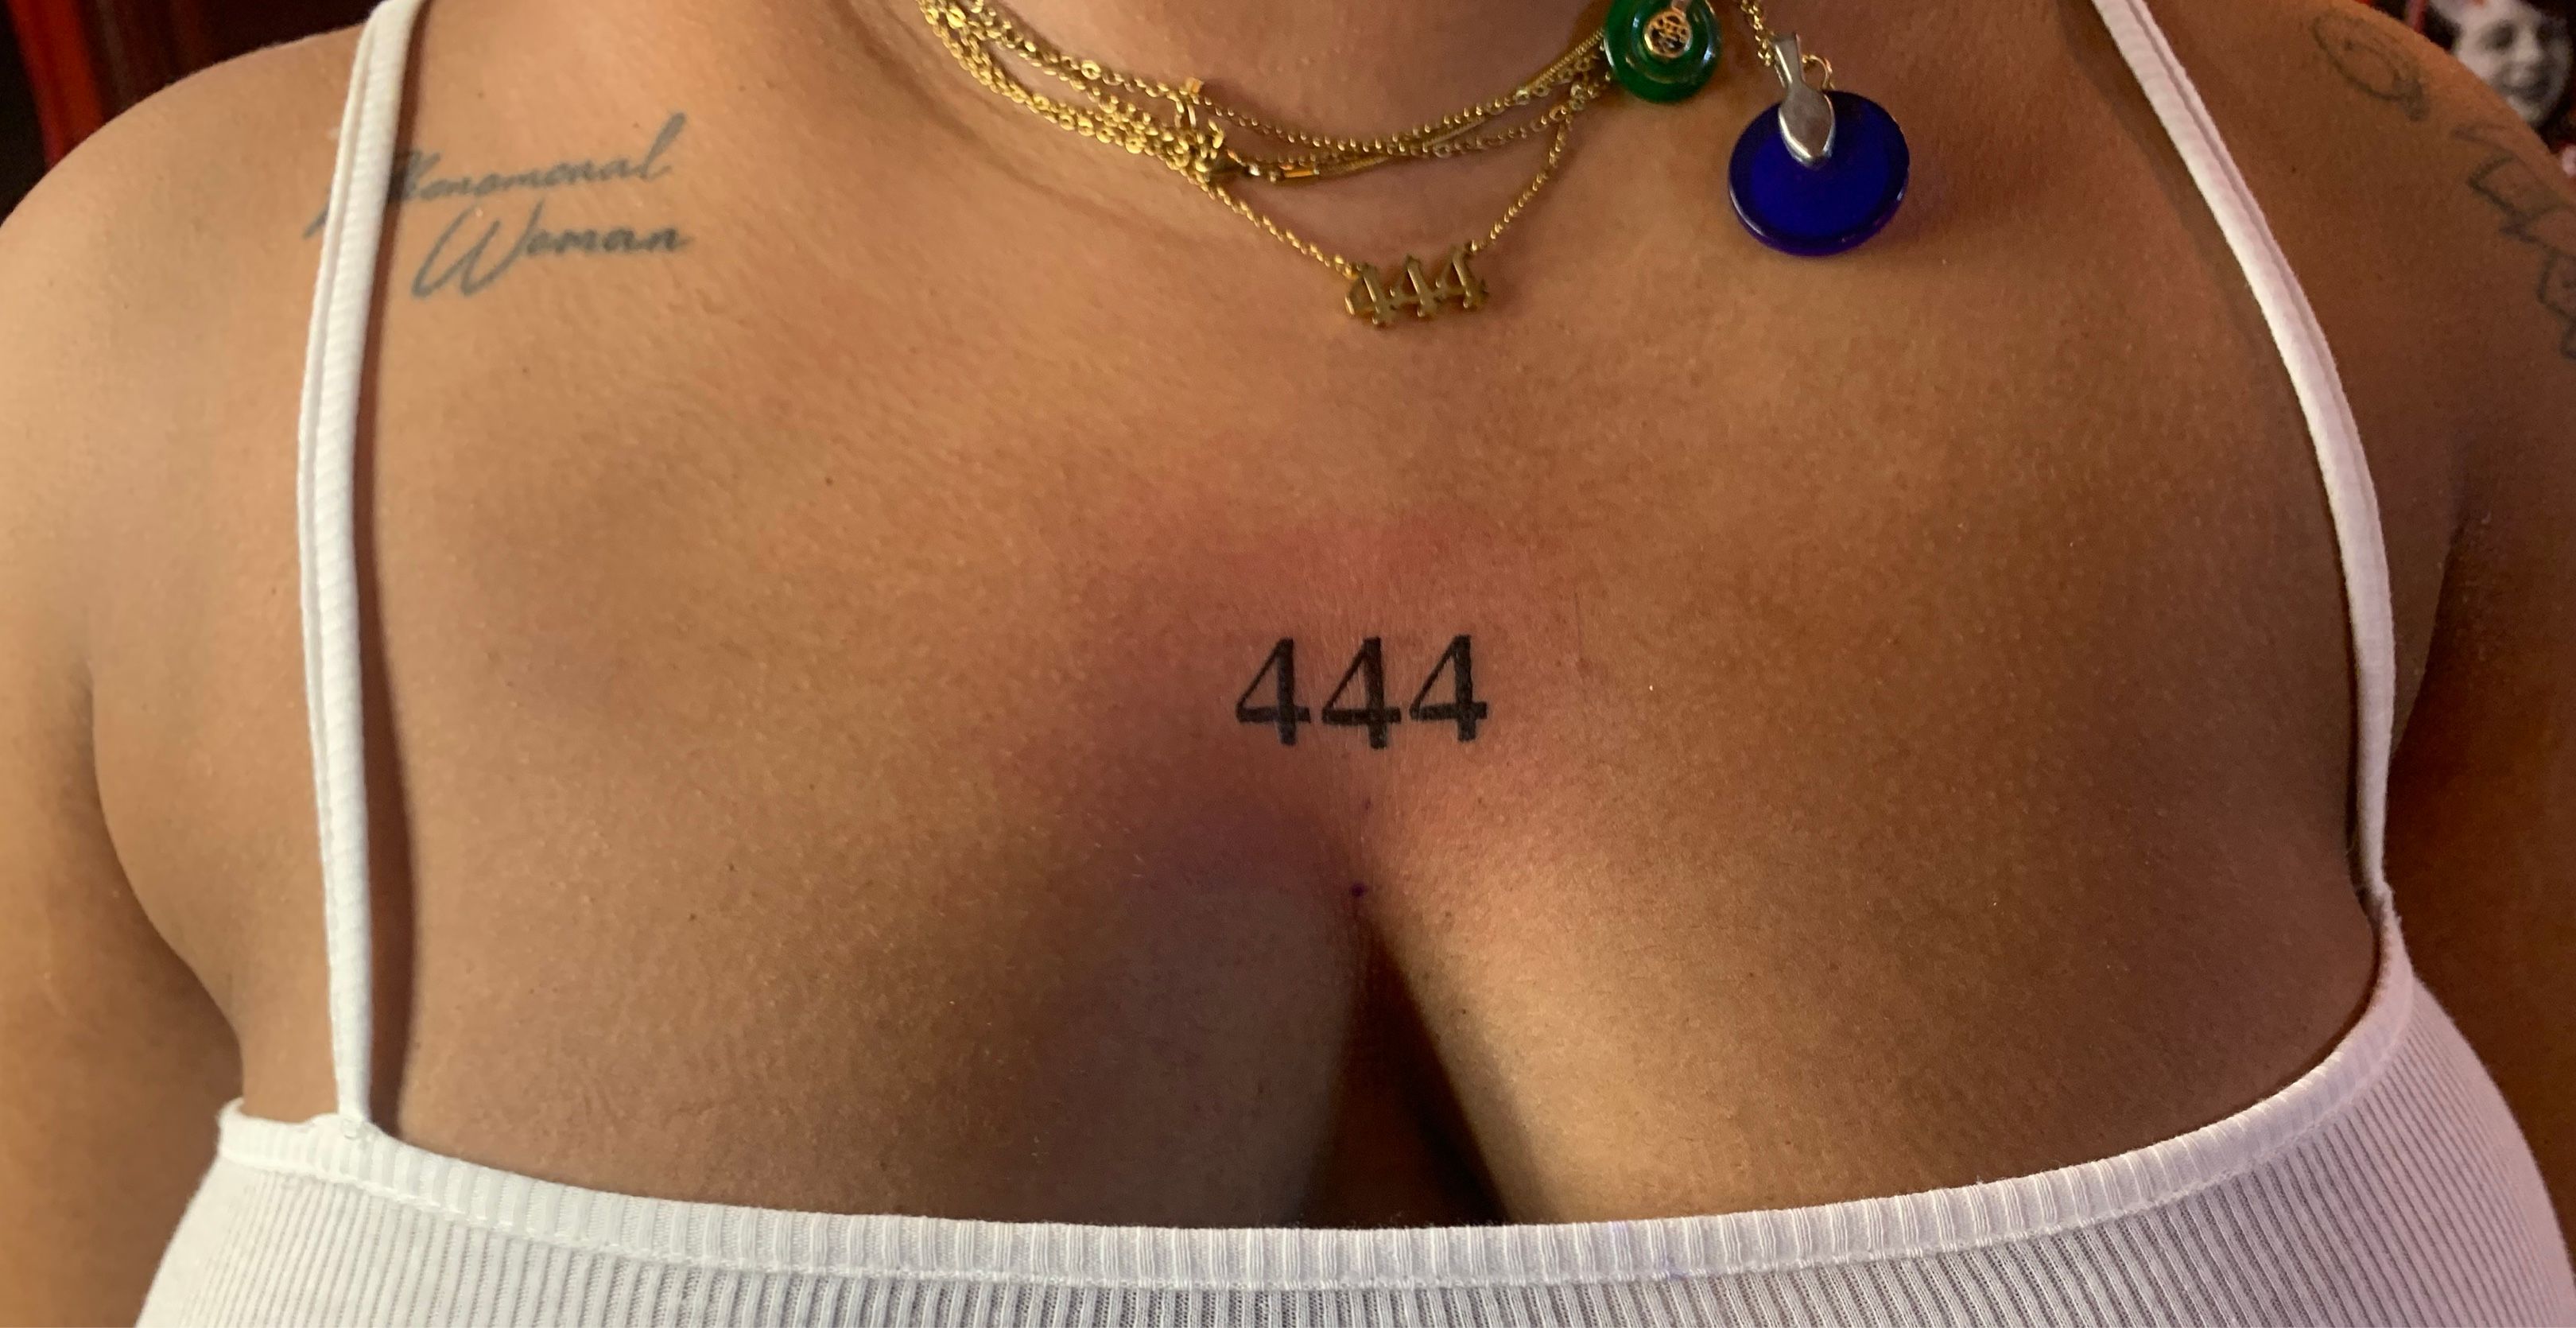 Buy 444 Tattoo Online In India  Etsy India